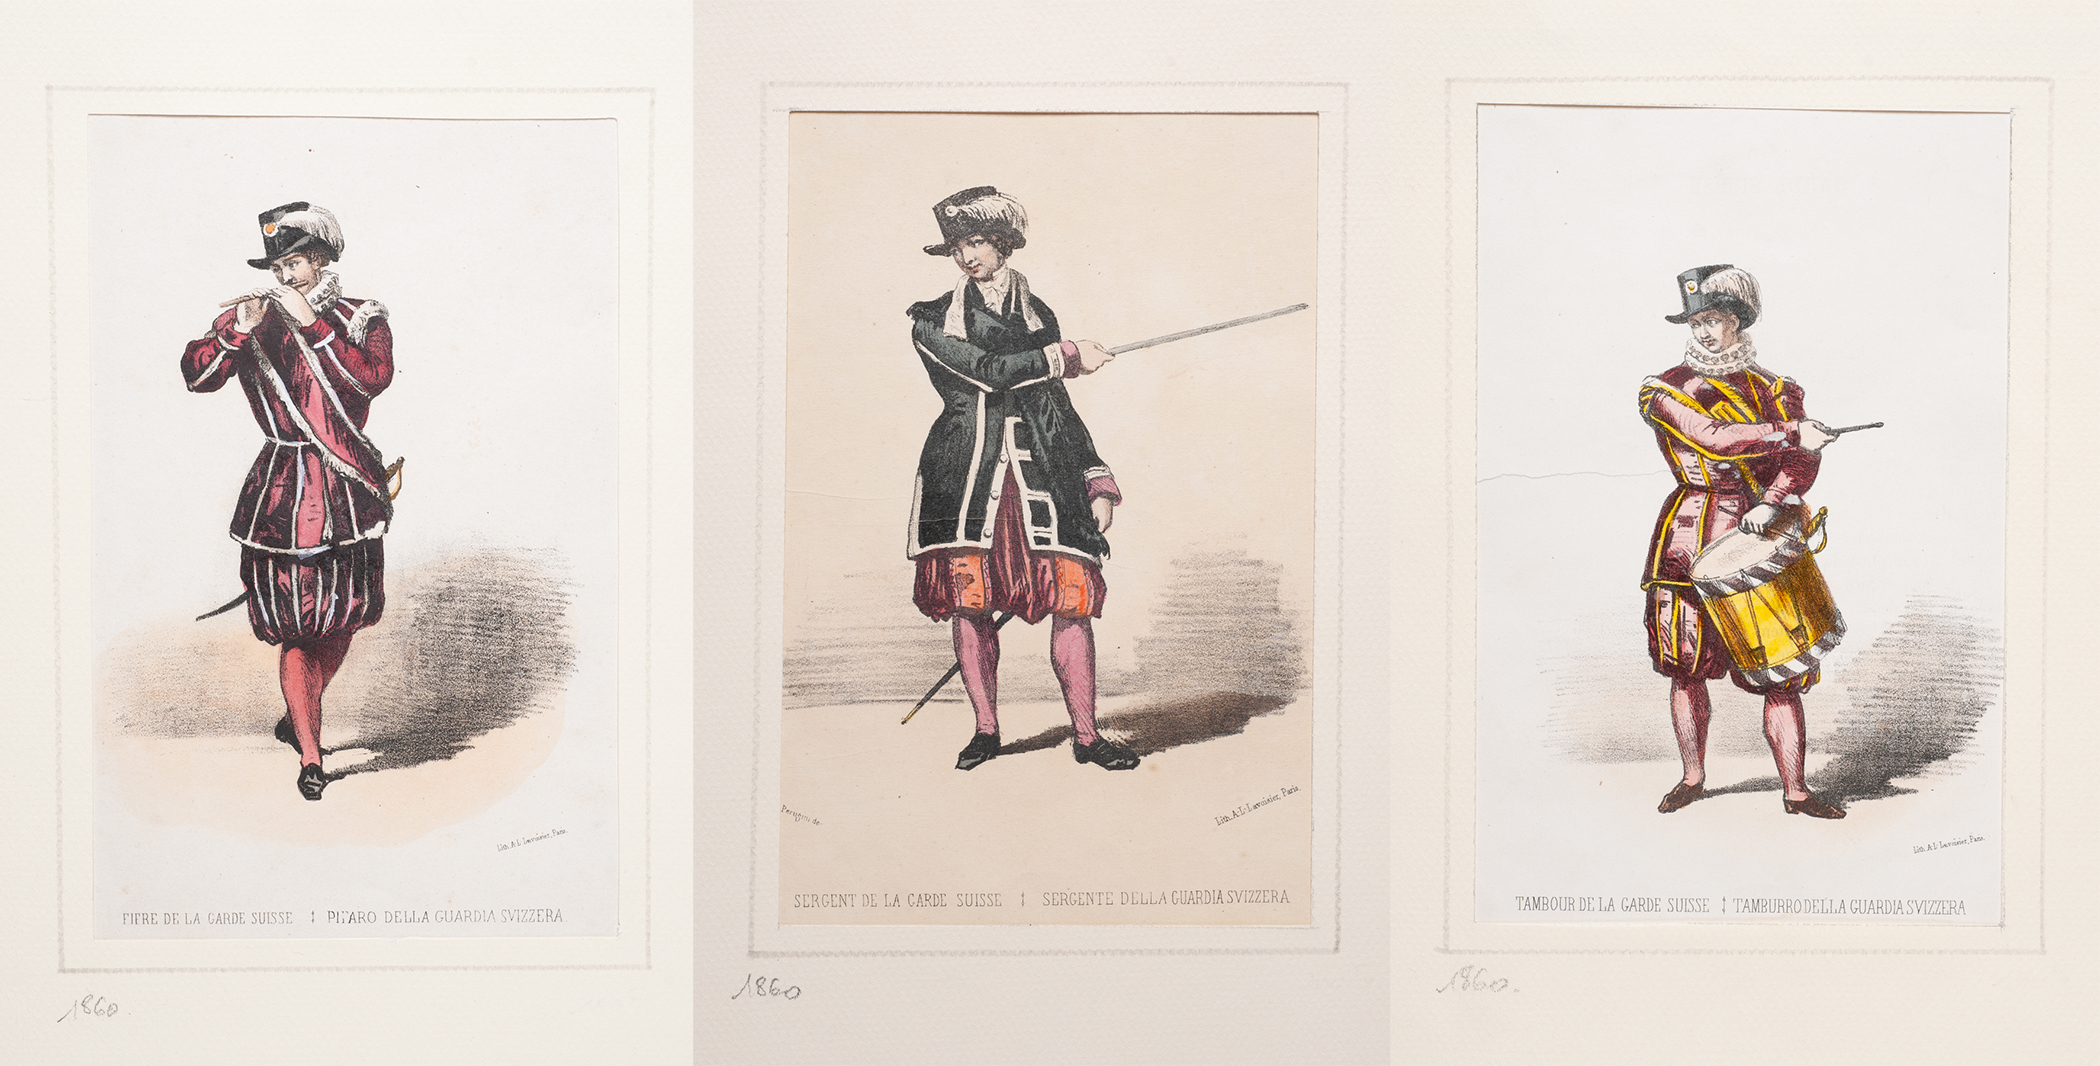 Set of three lithographed engravings formerly nuanced in watercolor, about the Swiss Guard